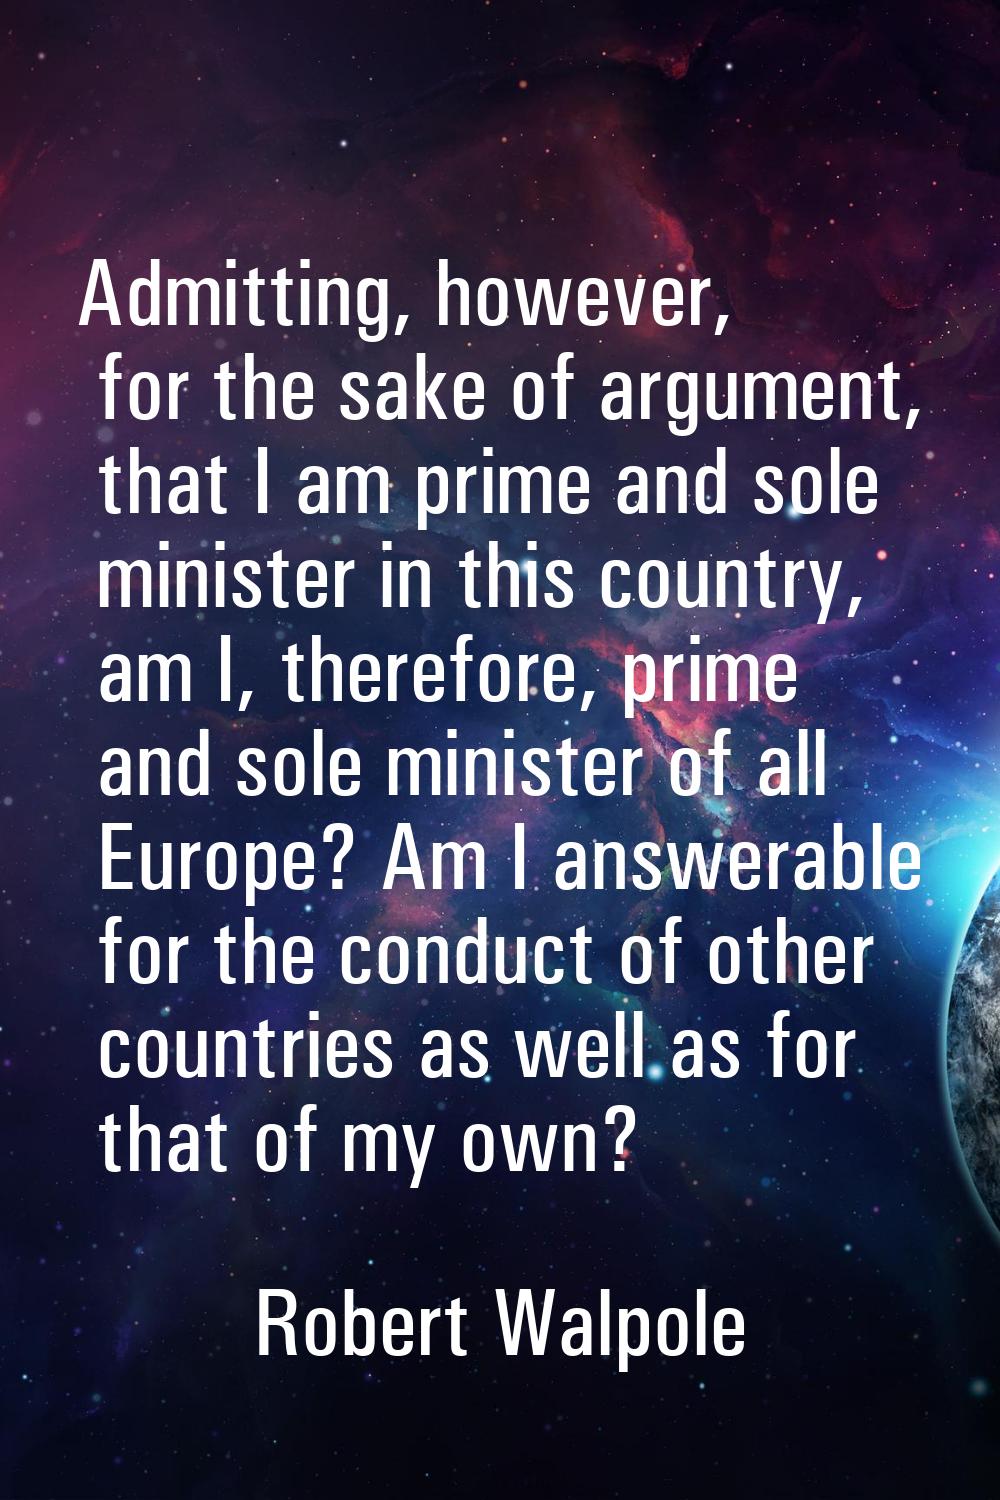 Admitting, however, for the sake of argument, that I am prime and sole minister in this country, am